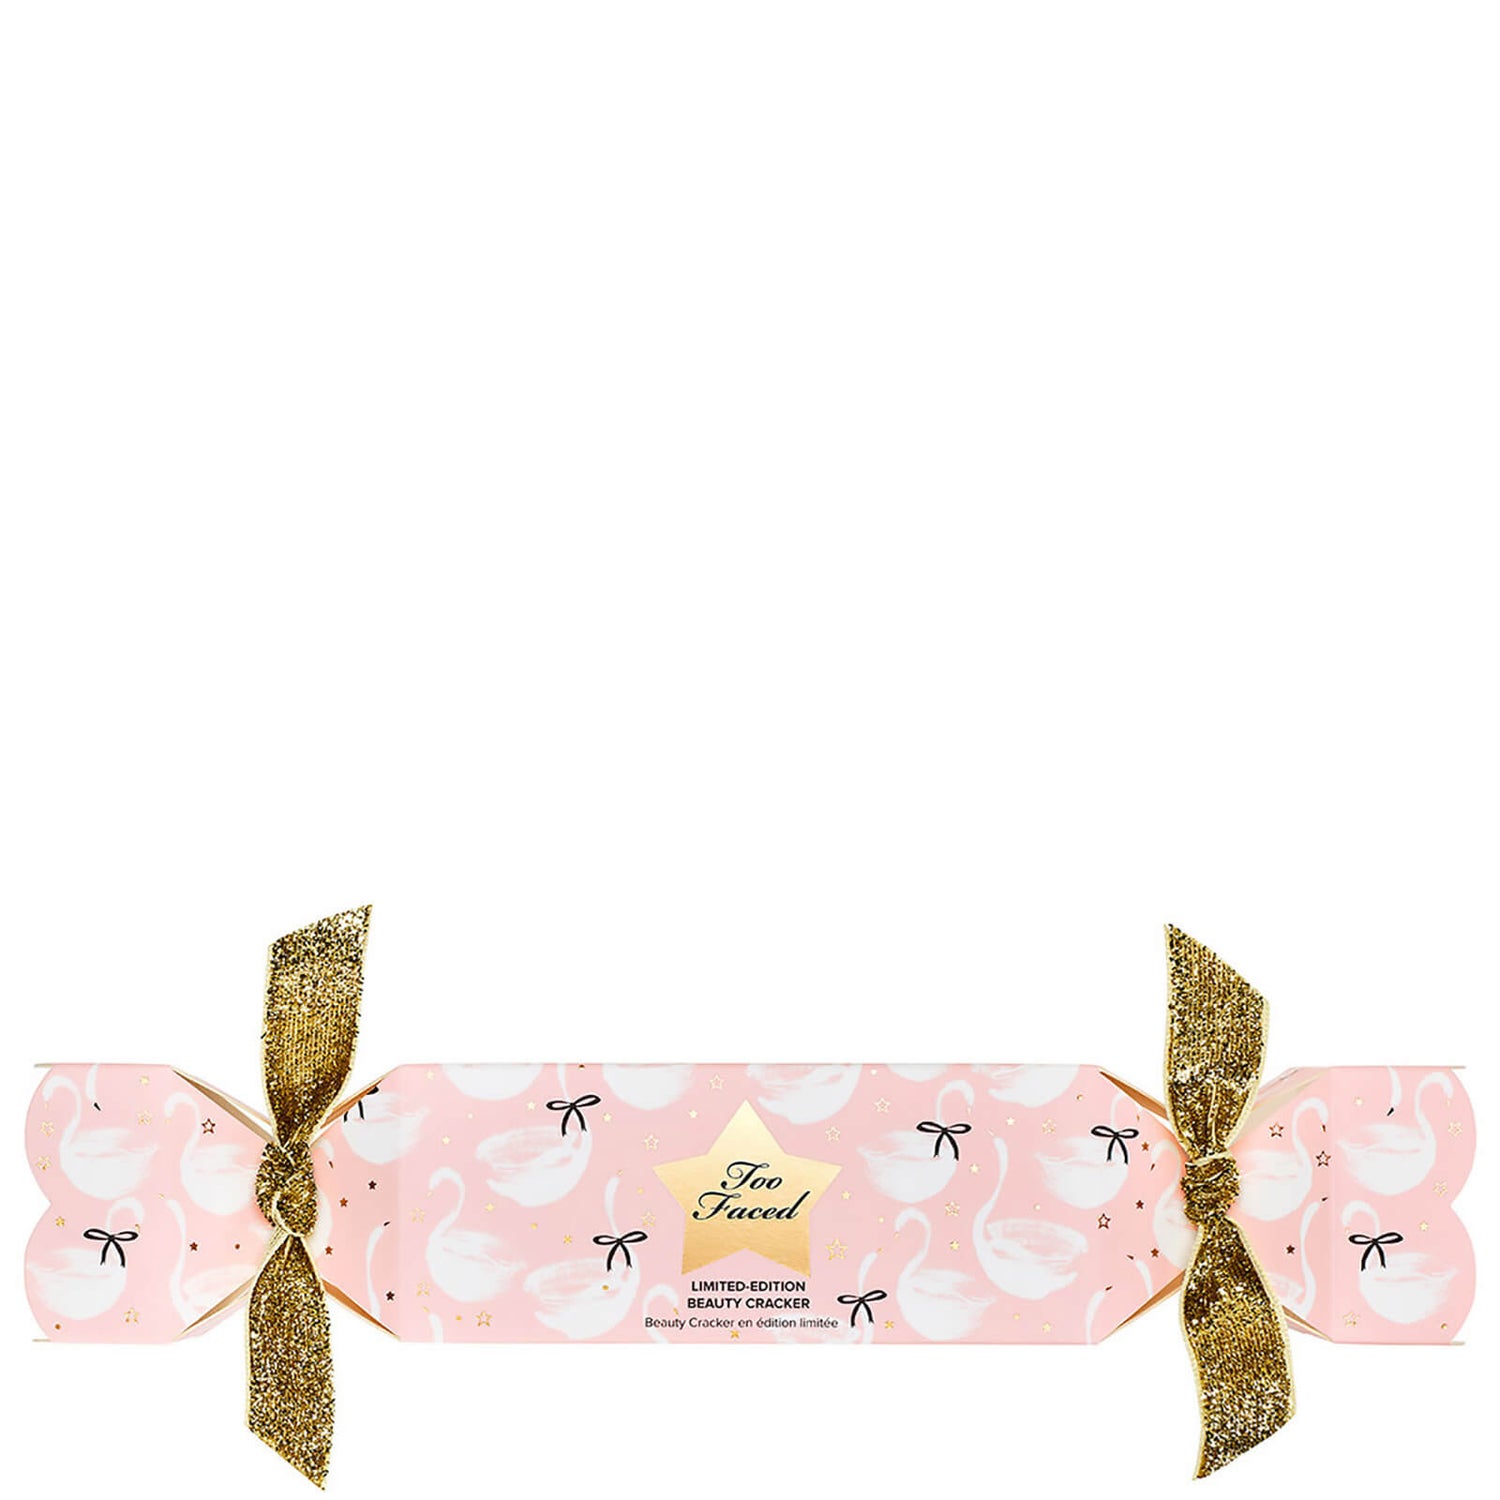 Too Faced Limited Edition Beauty Cracker